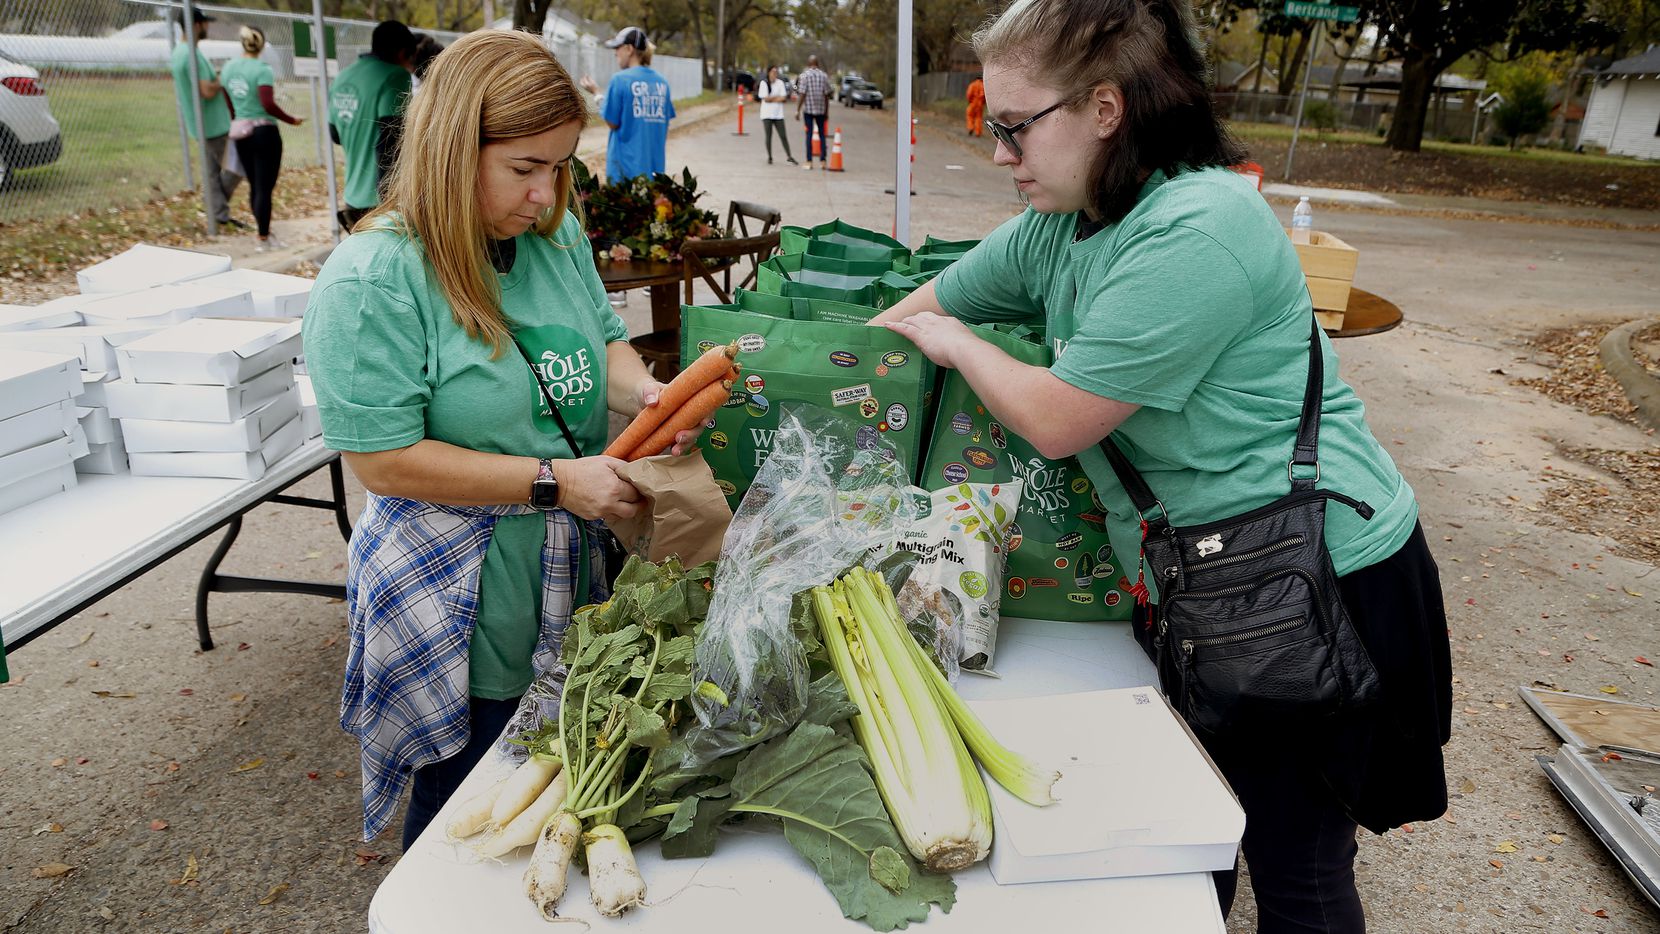 Whole Foods volunteers Christie Streit and Arael Byrd (right) place produce from Restorative Farms into bags in Dallas on Sunday, Nov. 21, 2021.